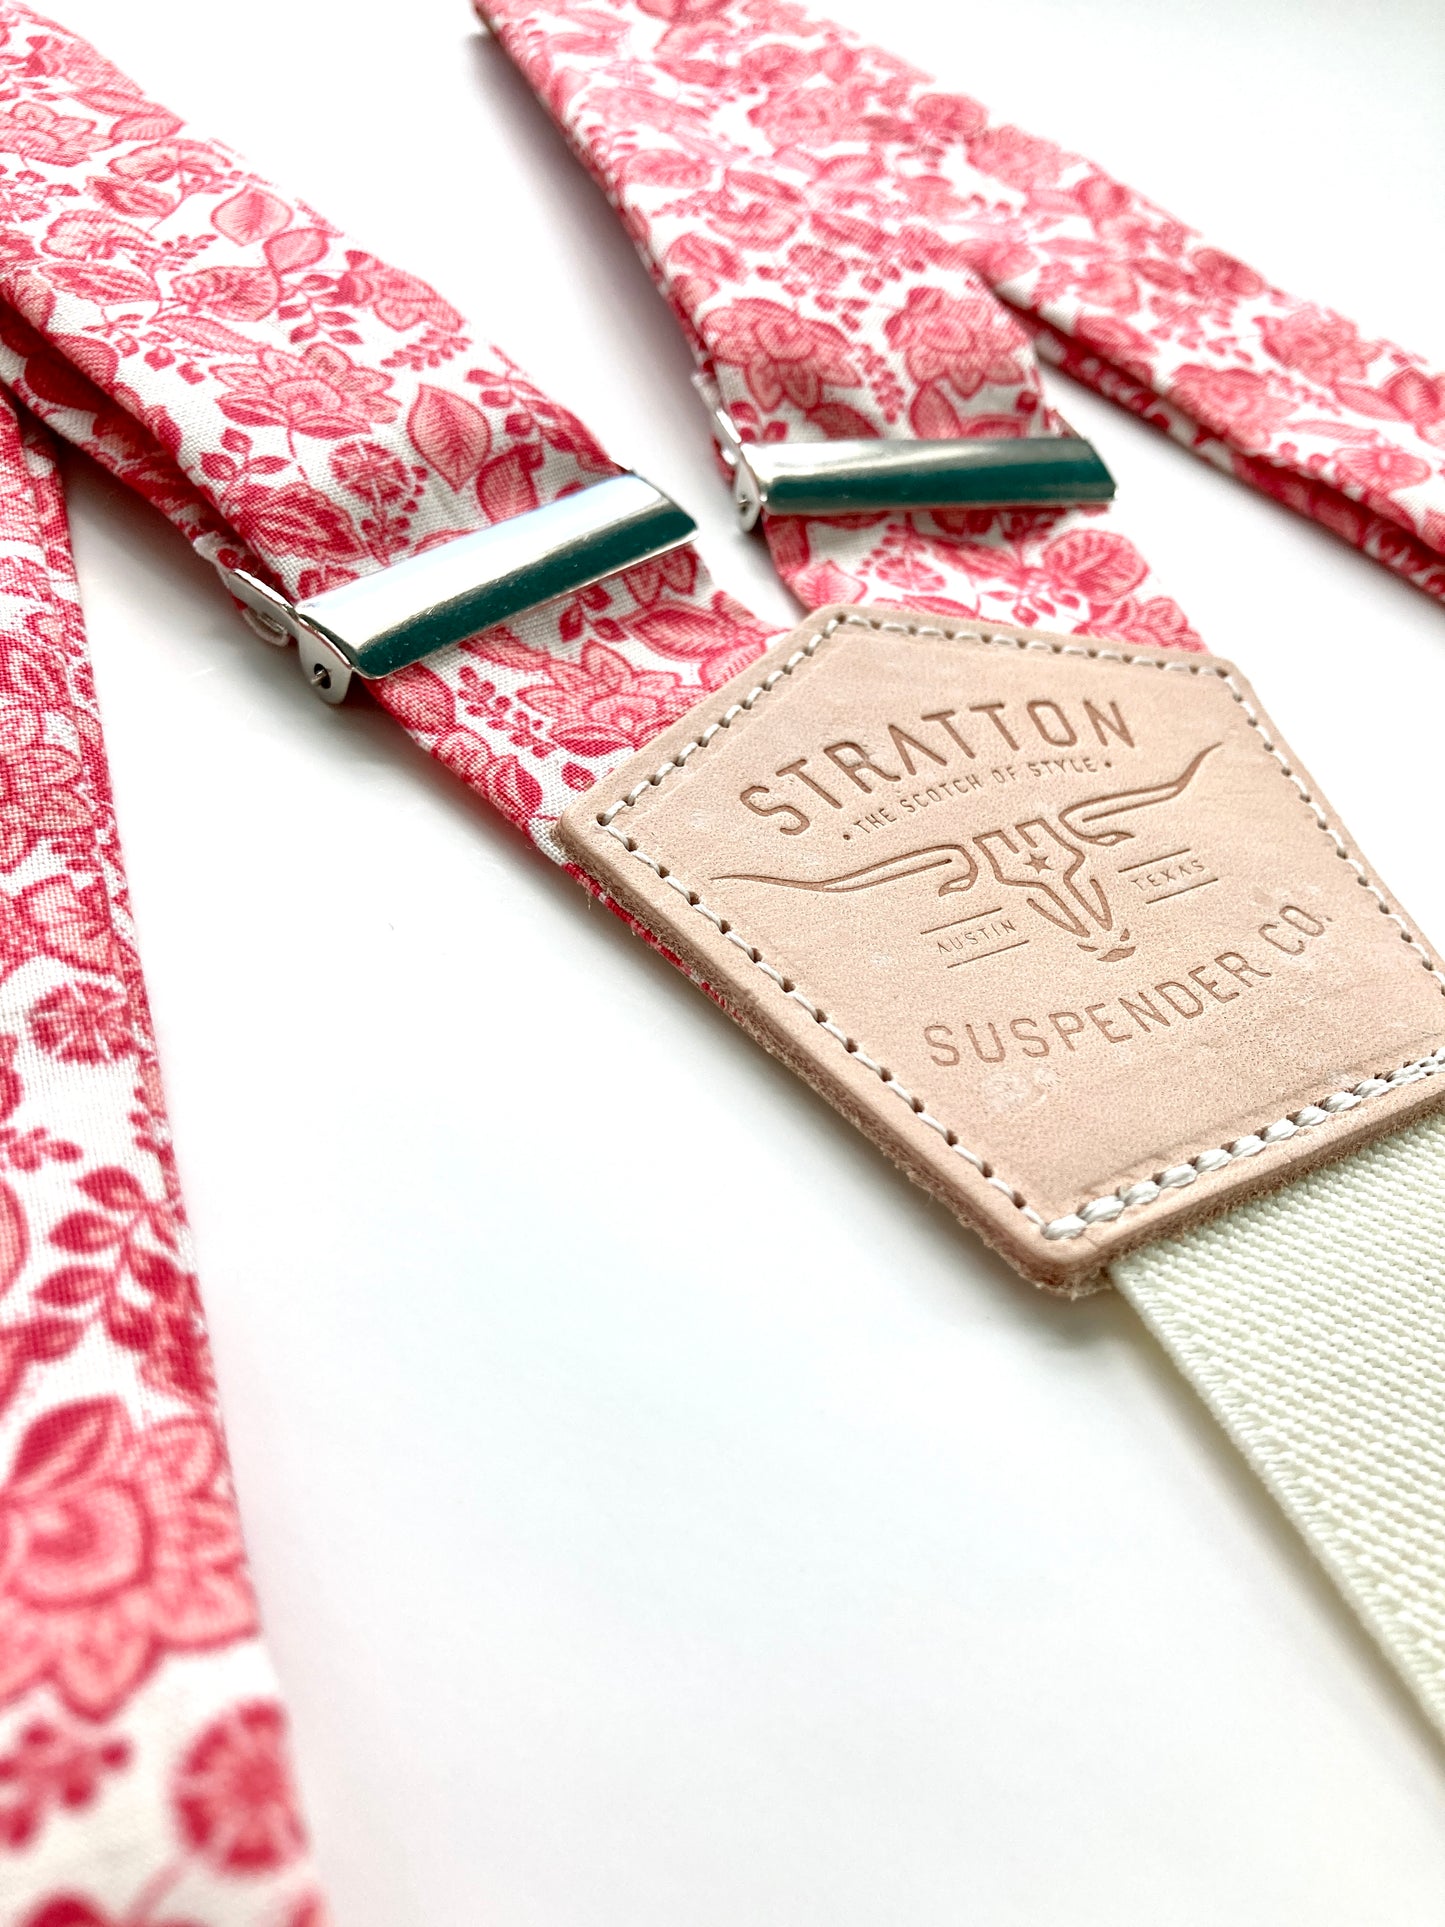 Stratton Suspenders Red Floral Straps of the Limited Edition 1880 Vintage Collection